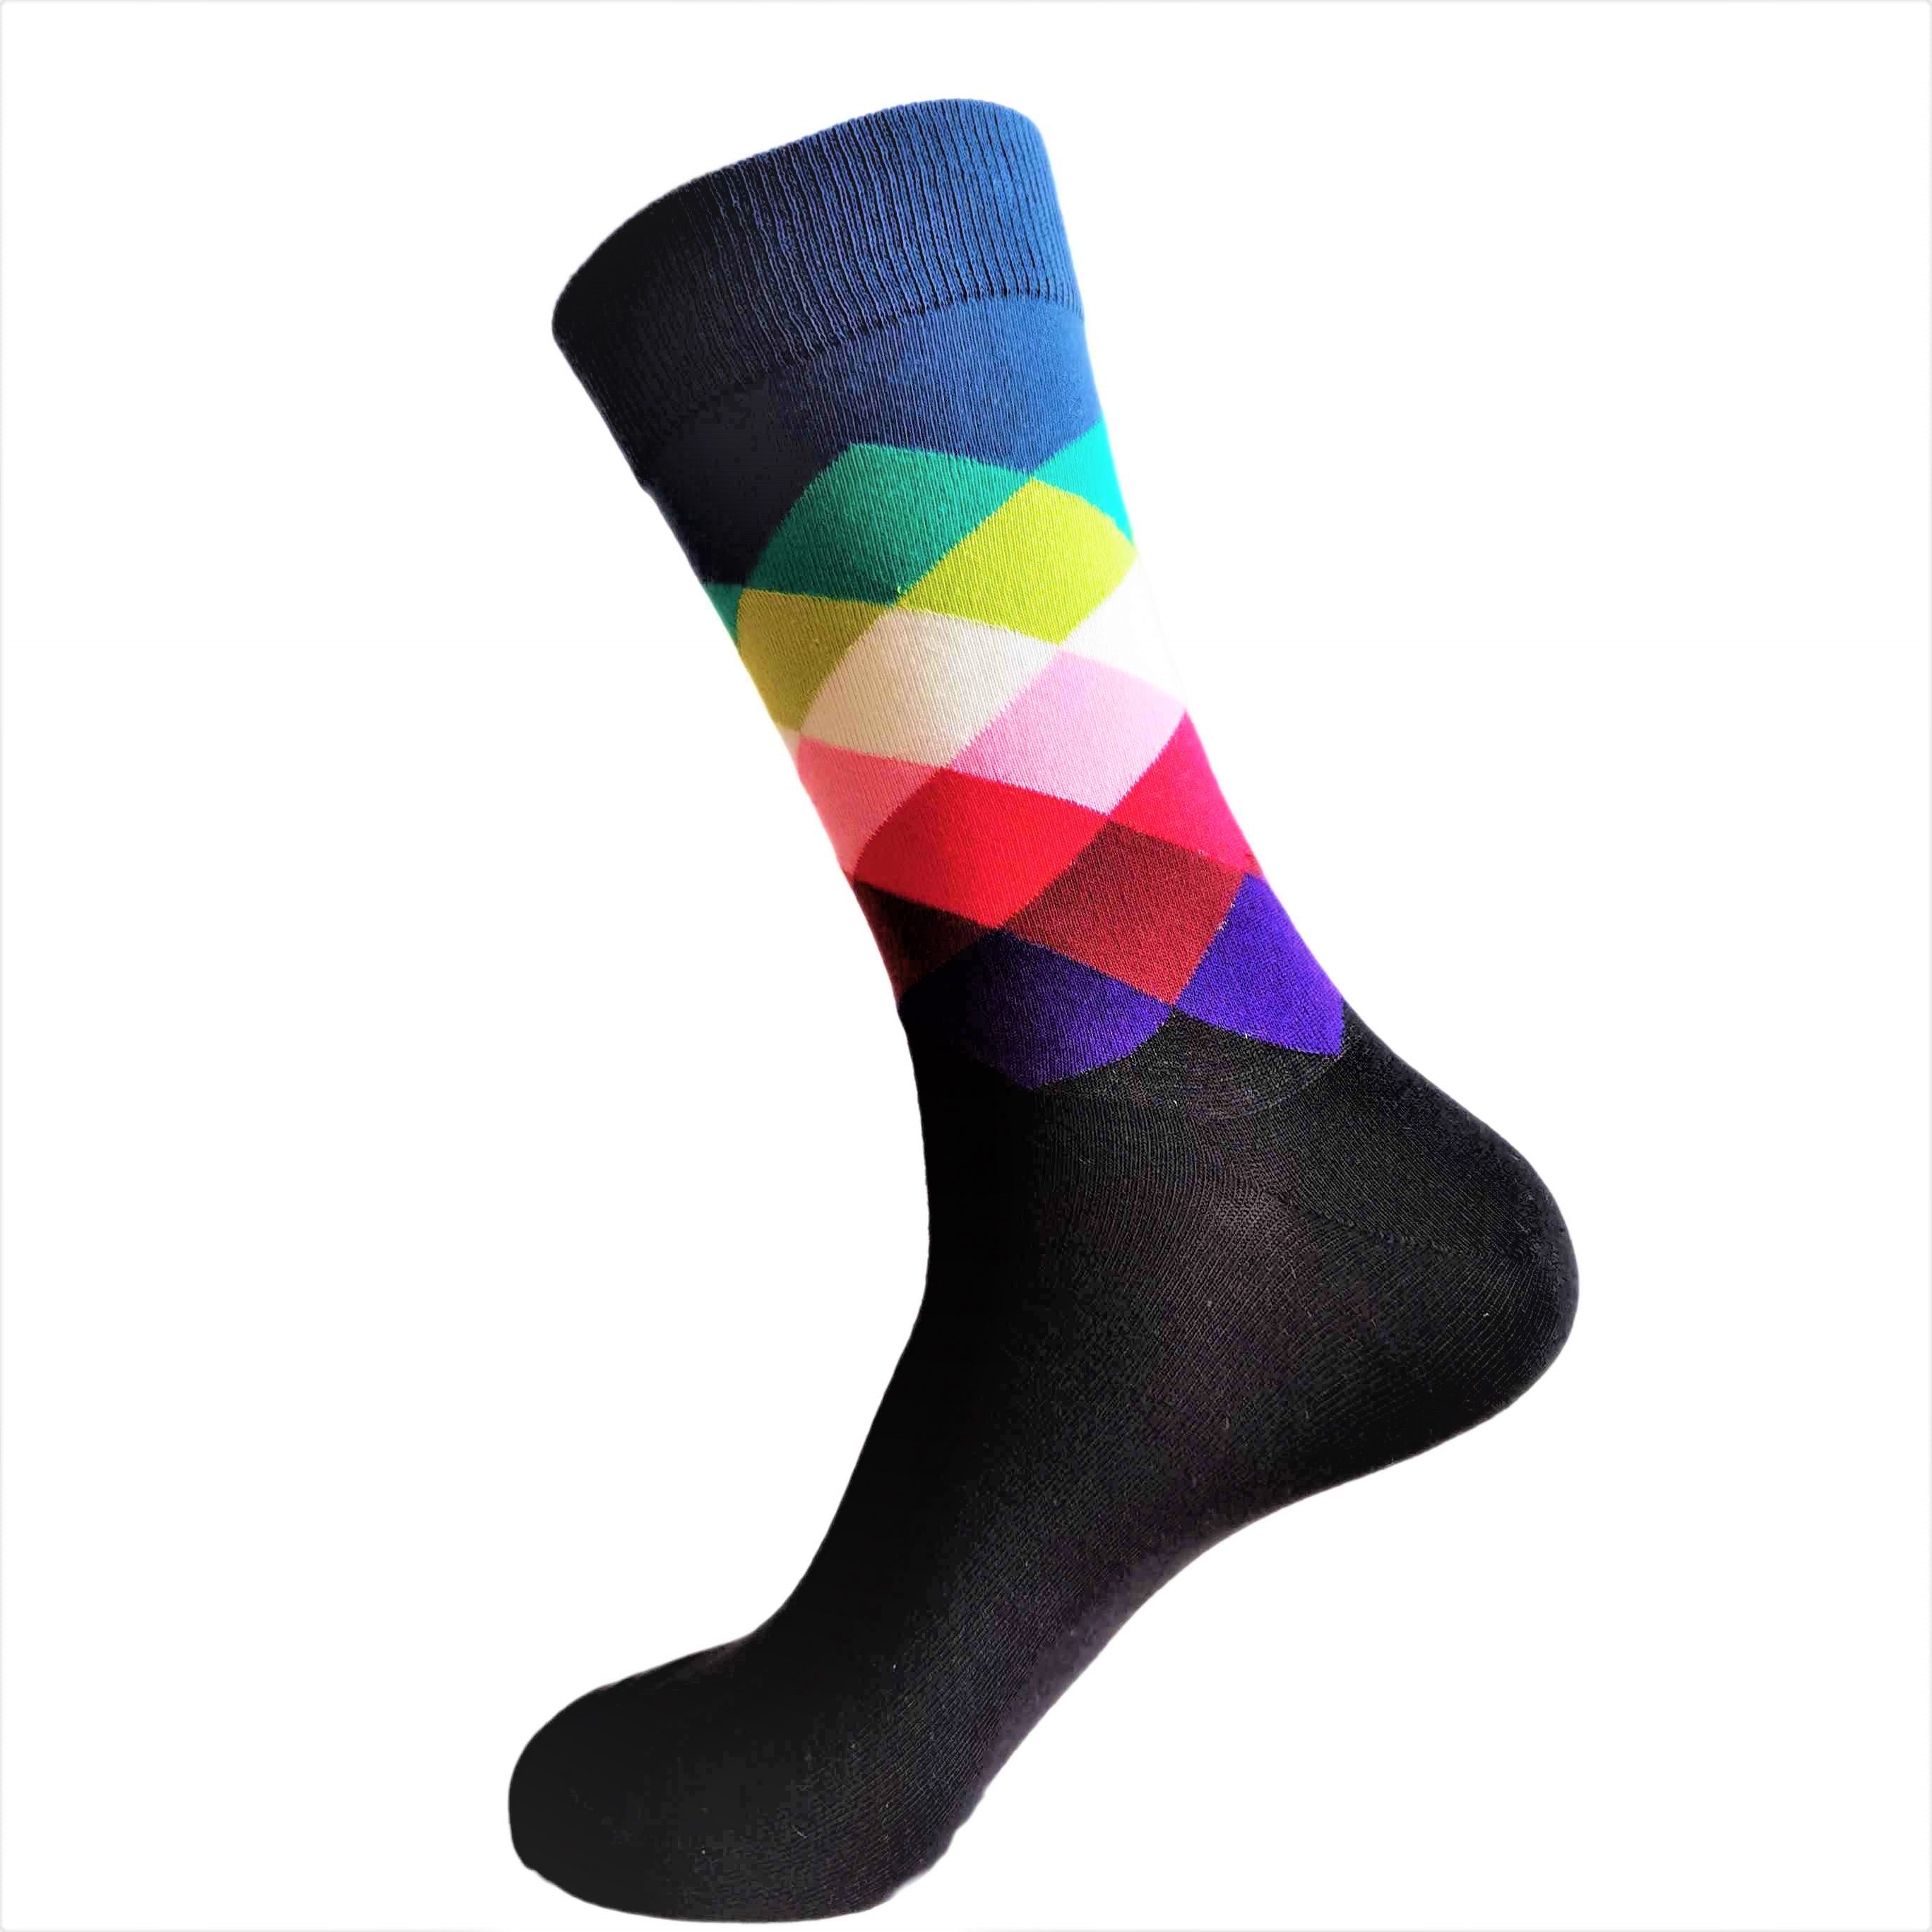 3-Pack Navy, Green and Pink Socks - British D'sire